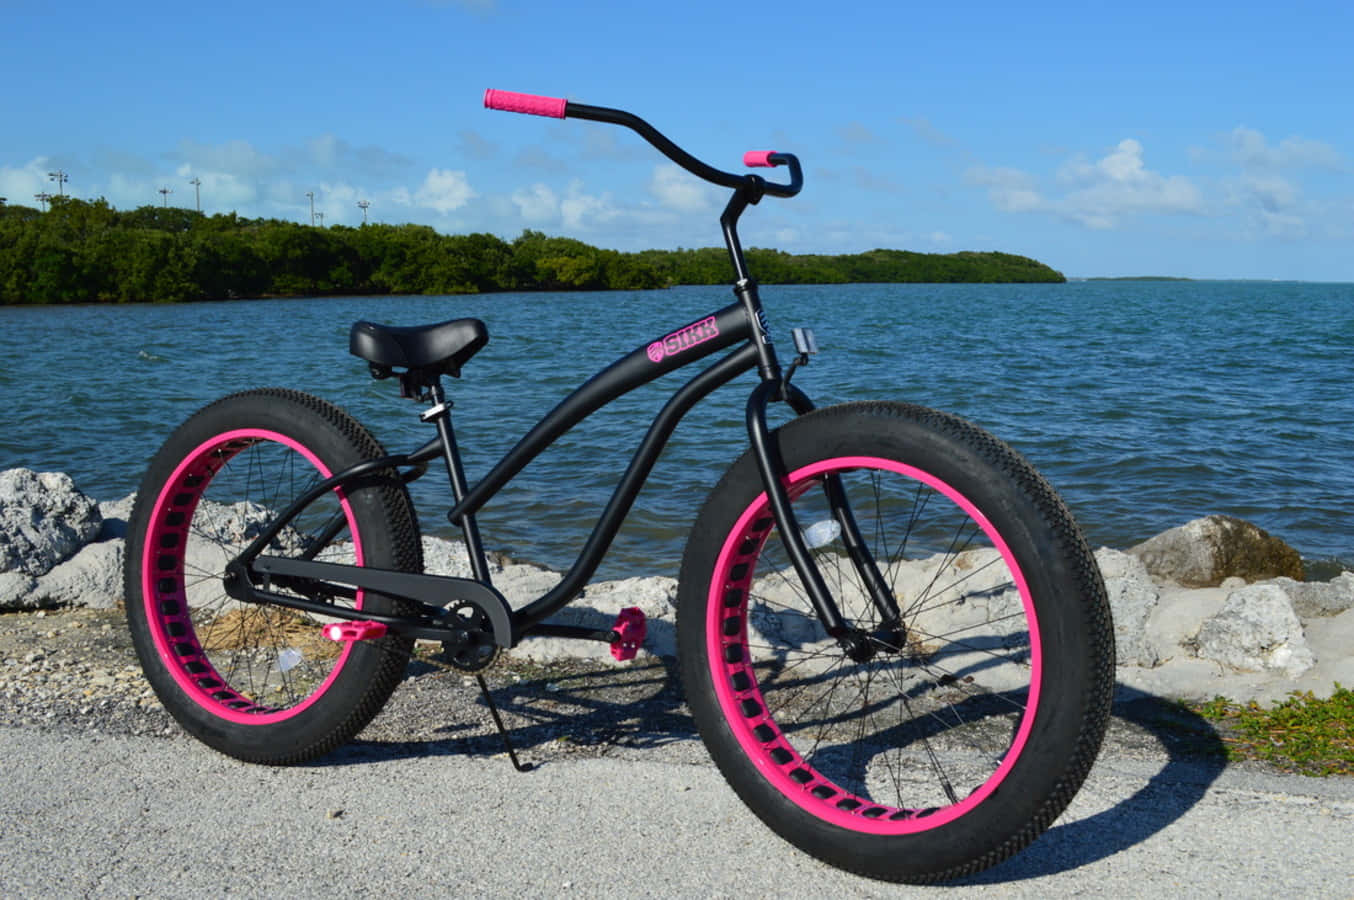 A Beach Cruiser Bicycle Parked by the Shore Wallpaper